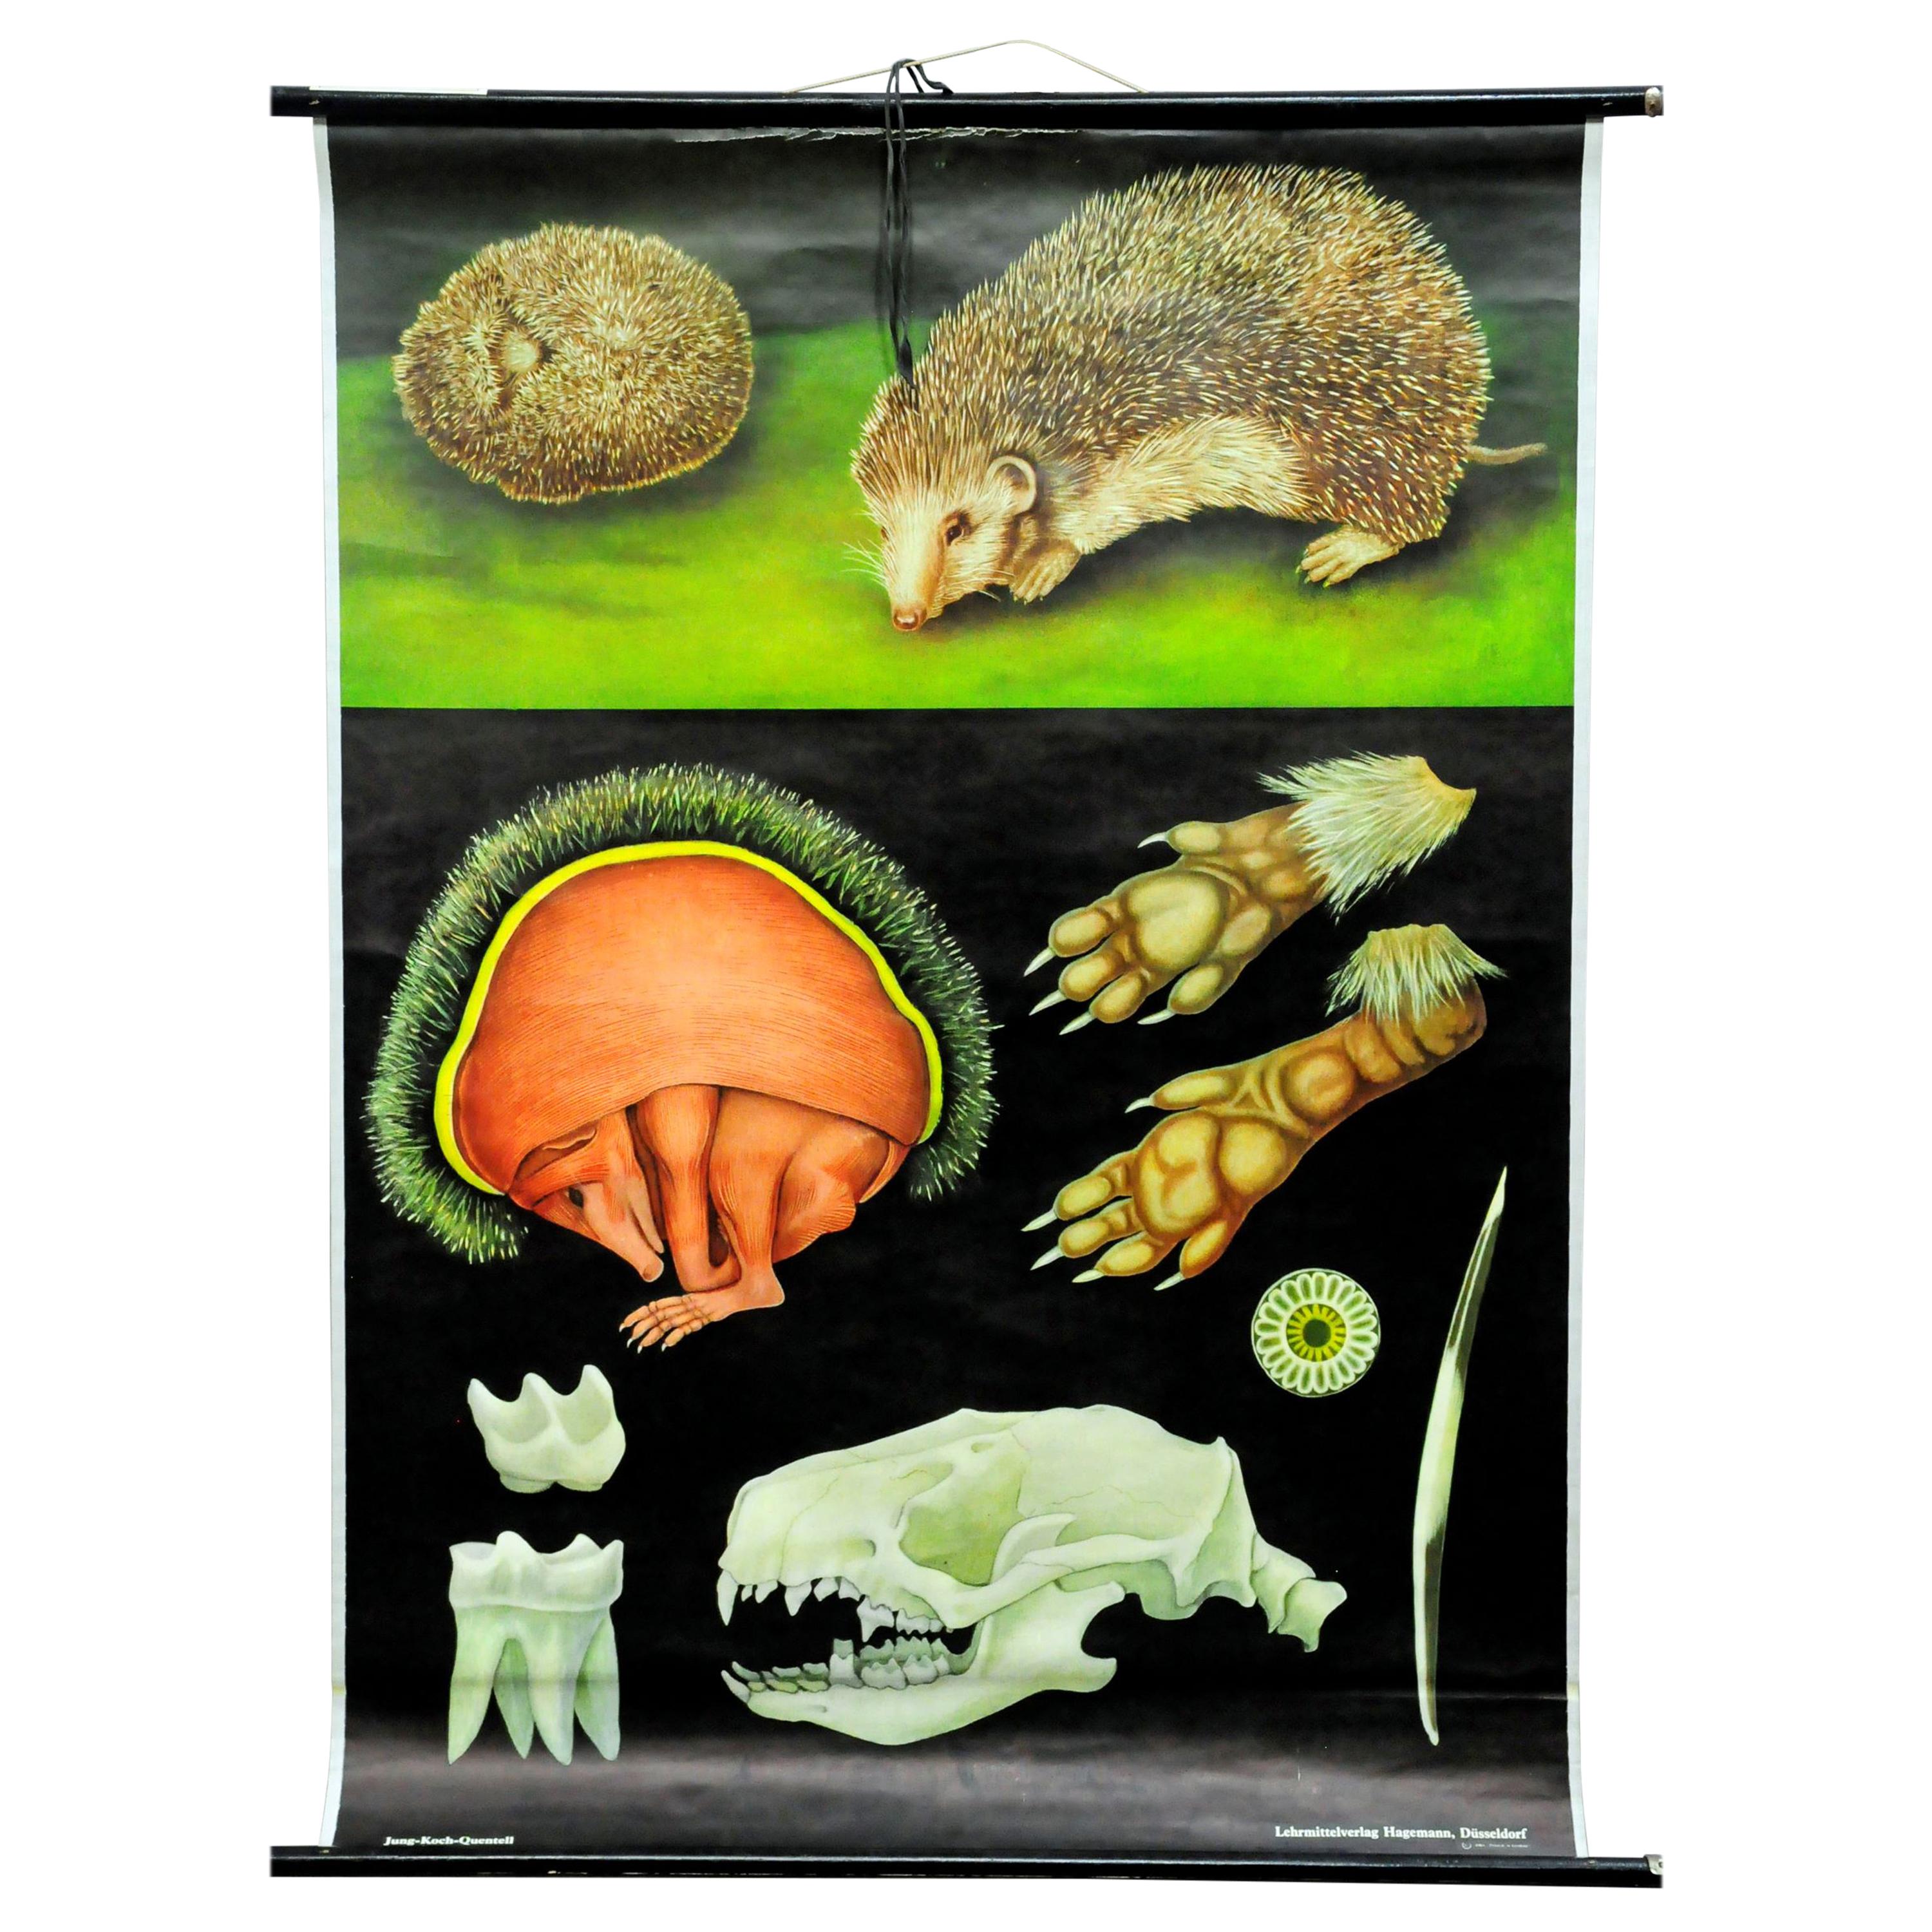 Cozyness Vintage Rollable Wall Chart Poster Hedgehog Jung Koch Quentell Mural For Sale